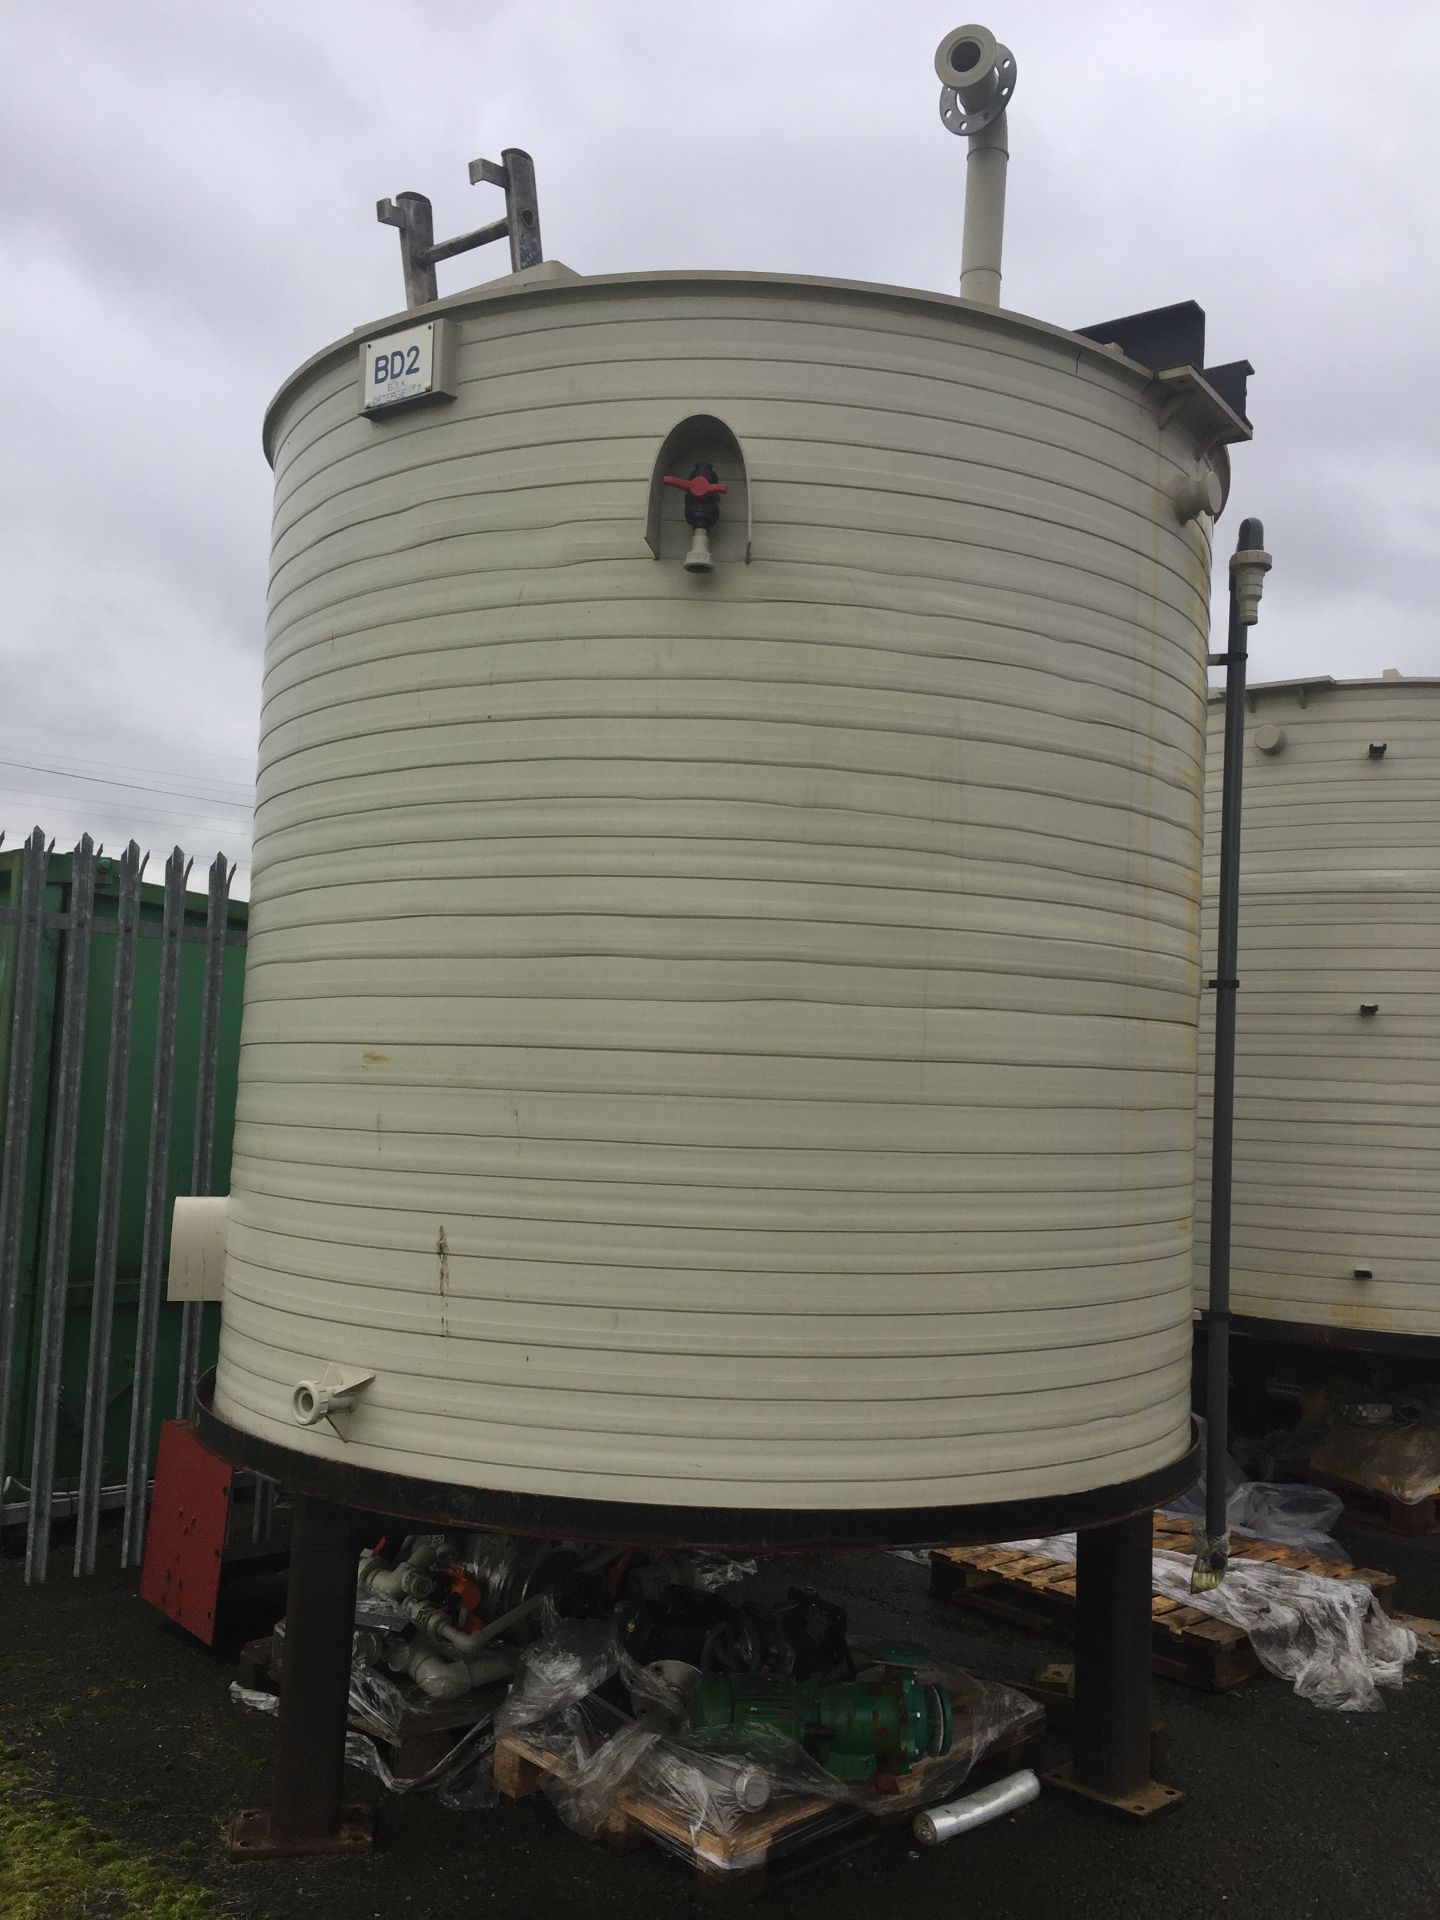 1 x BD2 12,000 Litre Polypropelene Chem Resist Tank - Location: Oldham Has been used for holding - Image 6 of 7